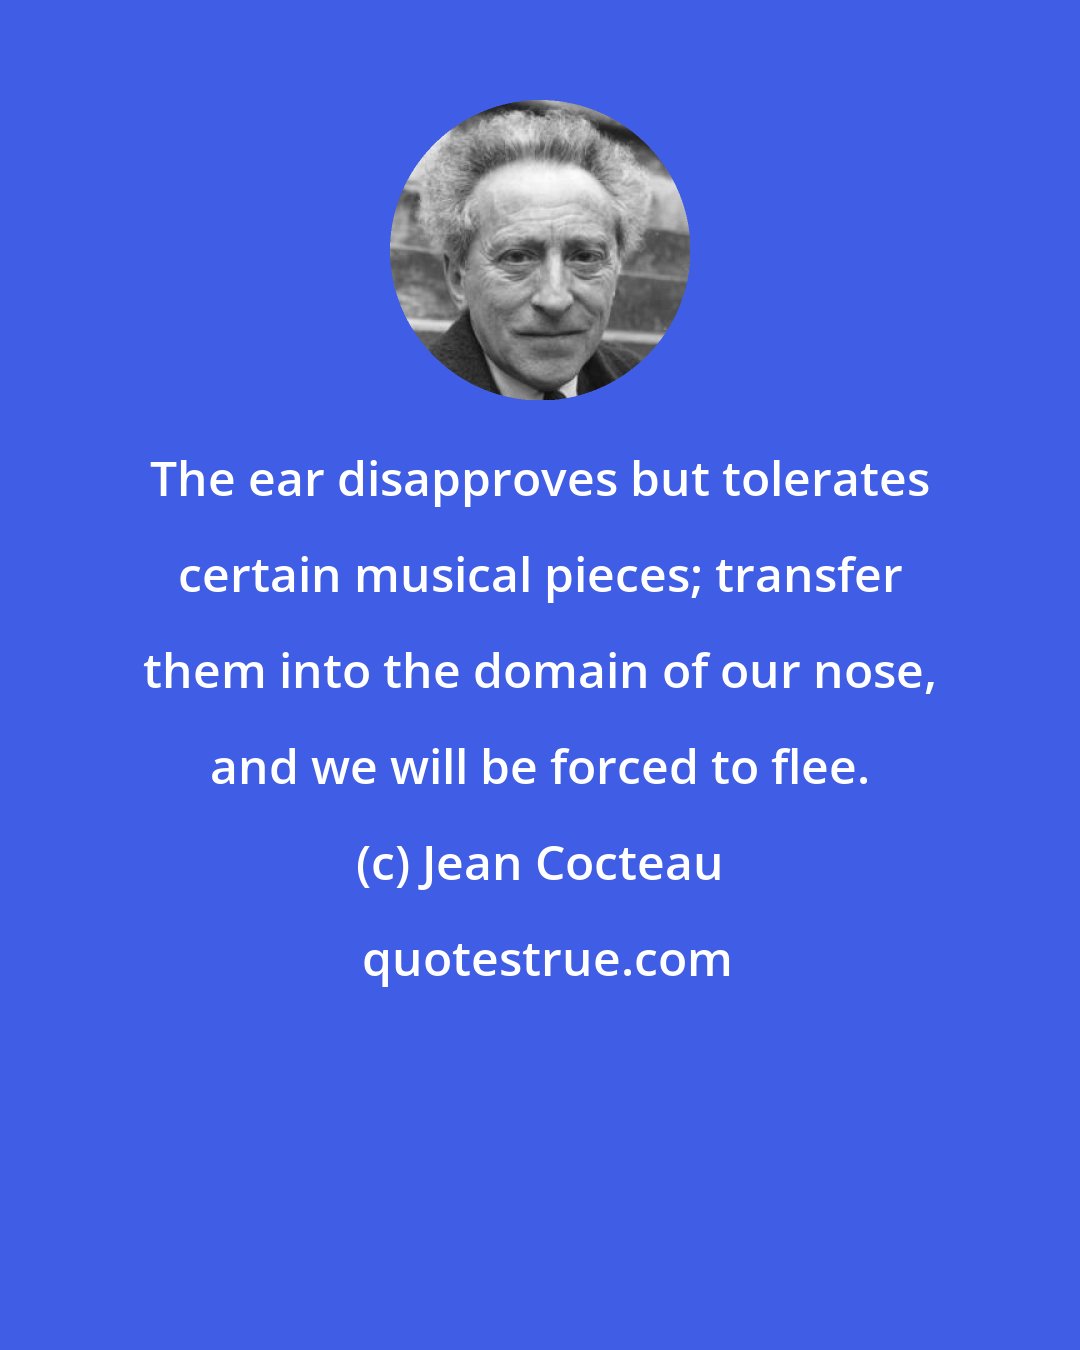 Jean Cocteau: The ear disapproves but tolerates certain musical pieces; transfer them into the domain of our nose, and we will be forced to flee.